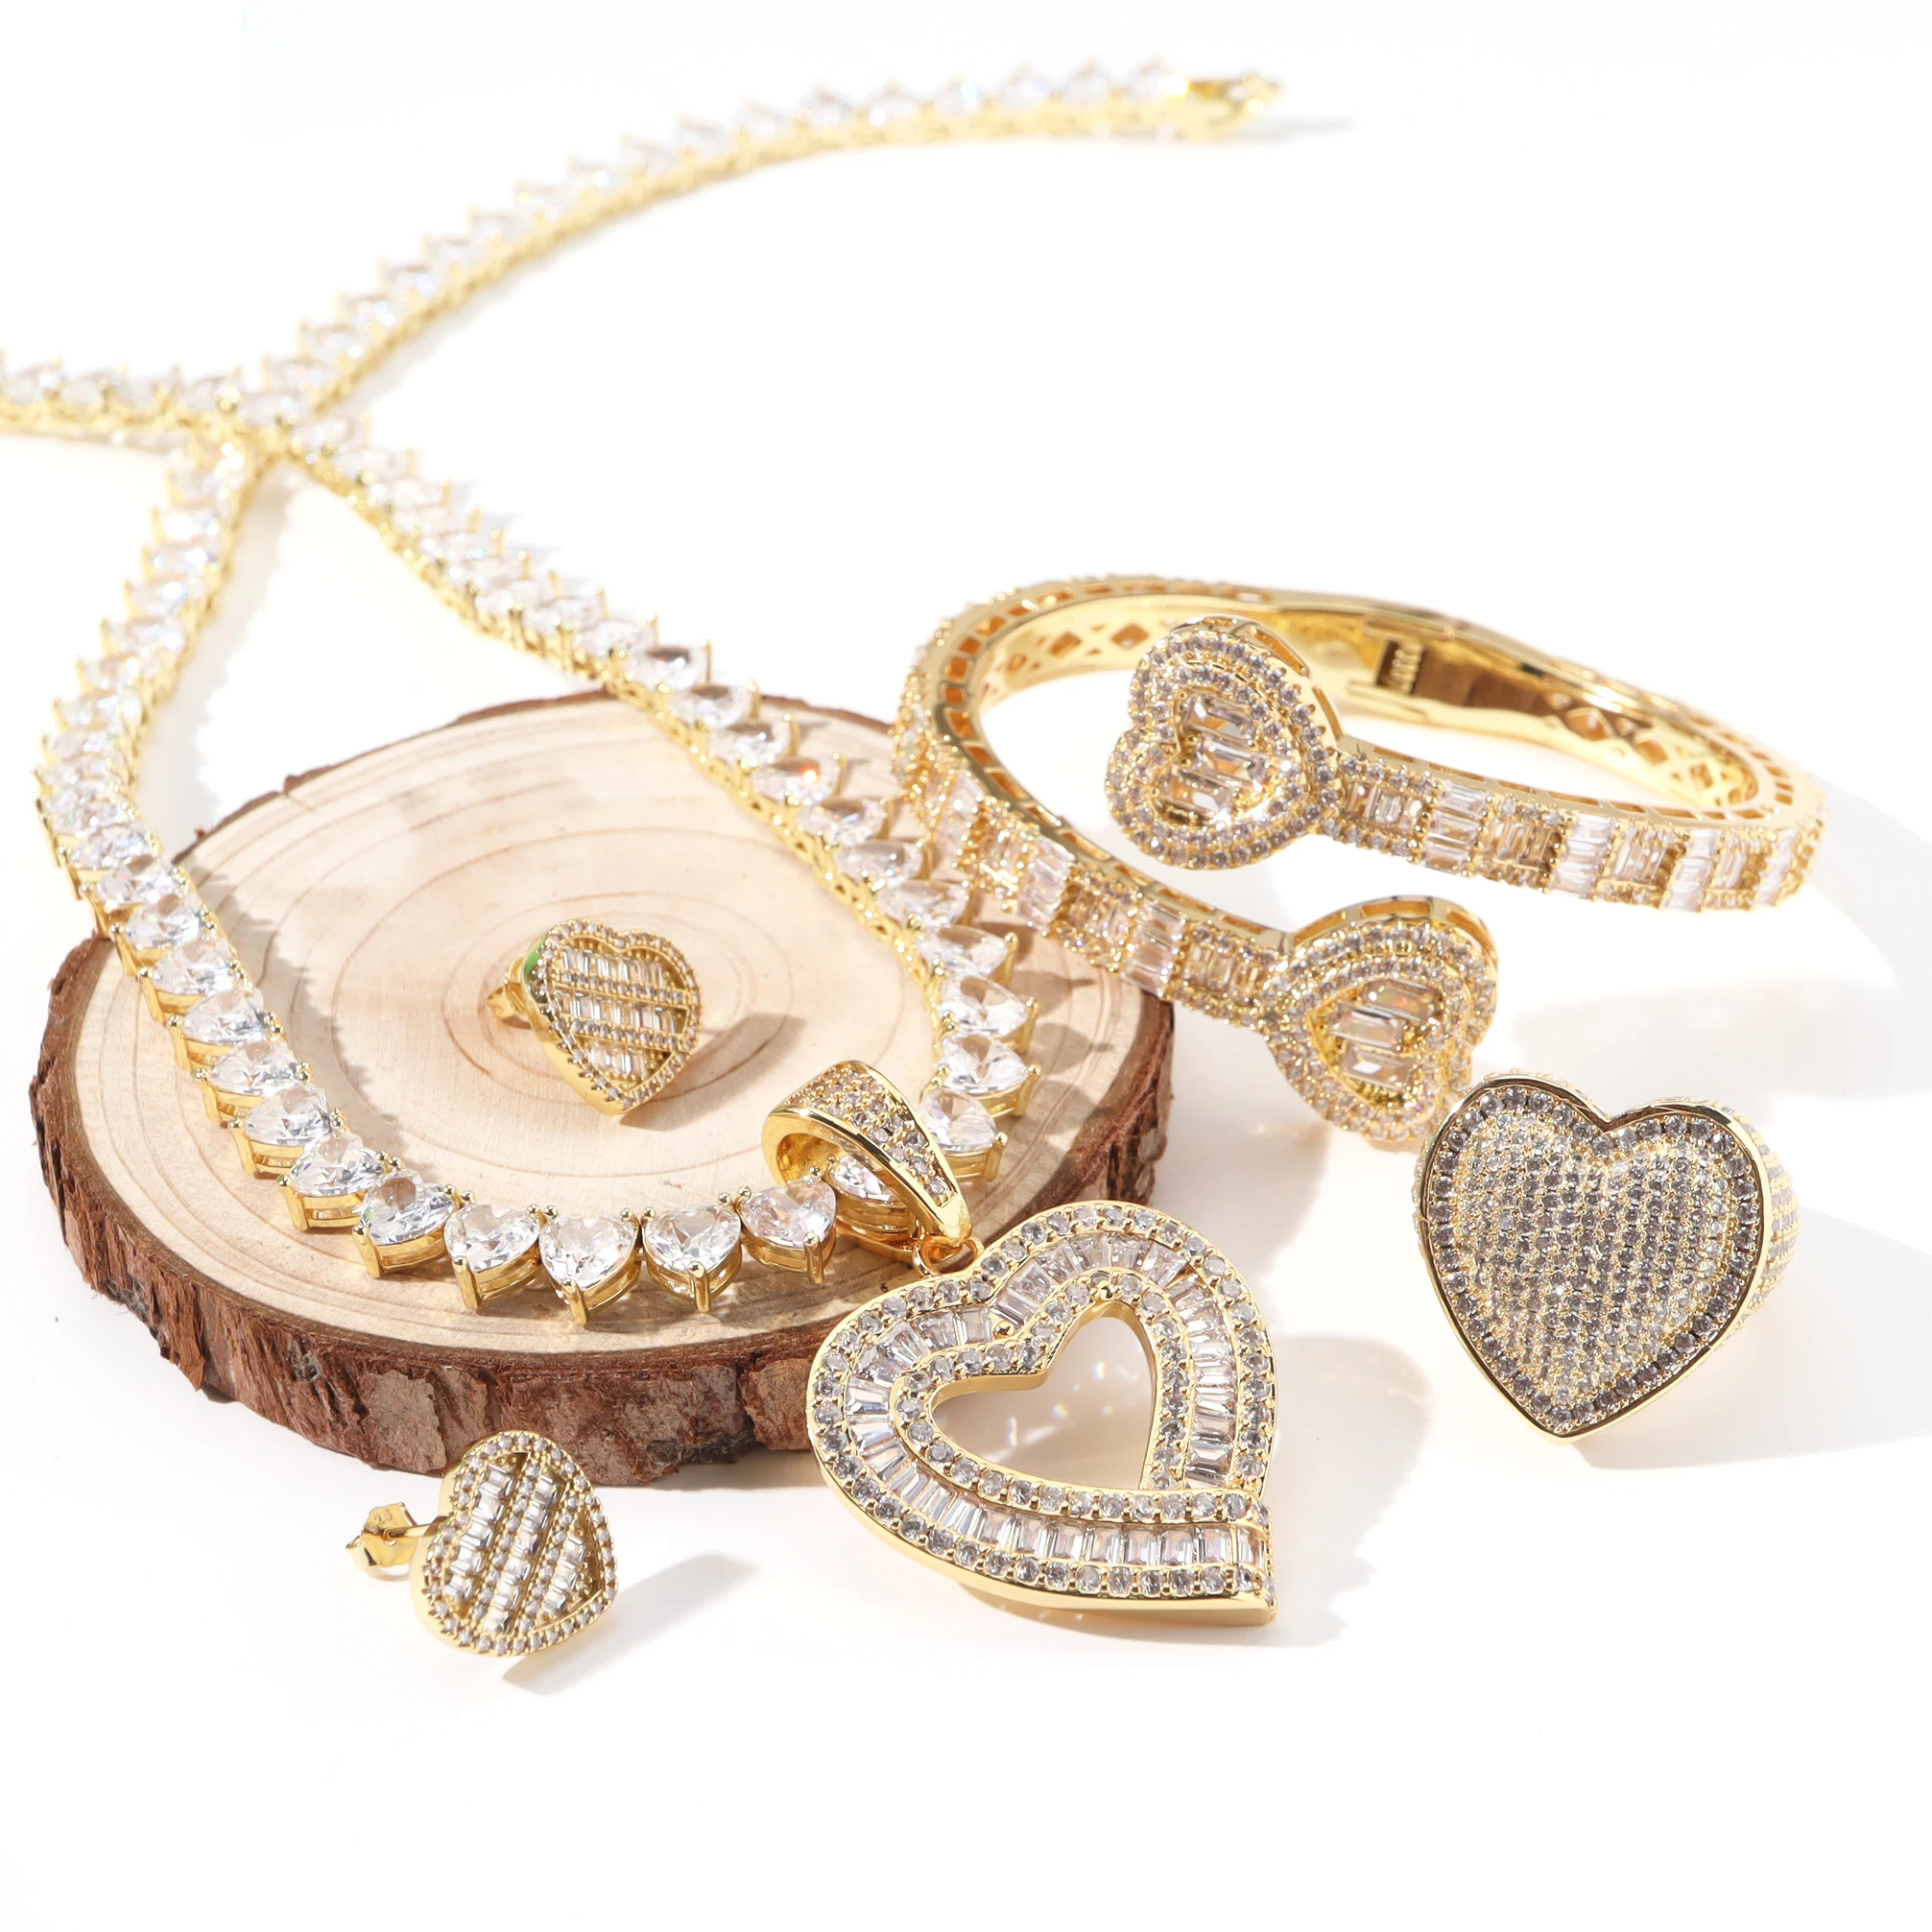 Icy iced out heart design love style women jewelry set cz bling bling iced out heart baguette bangle earring pendant jewelry set